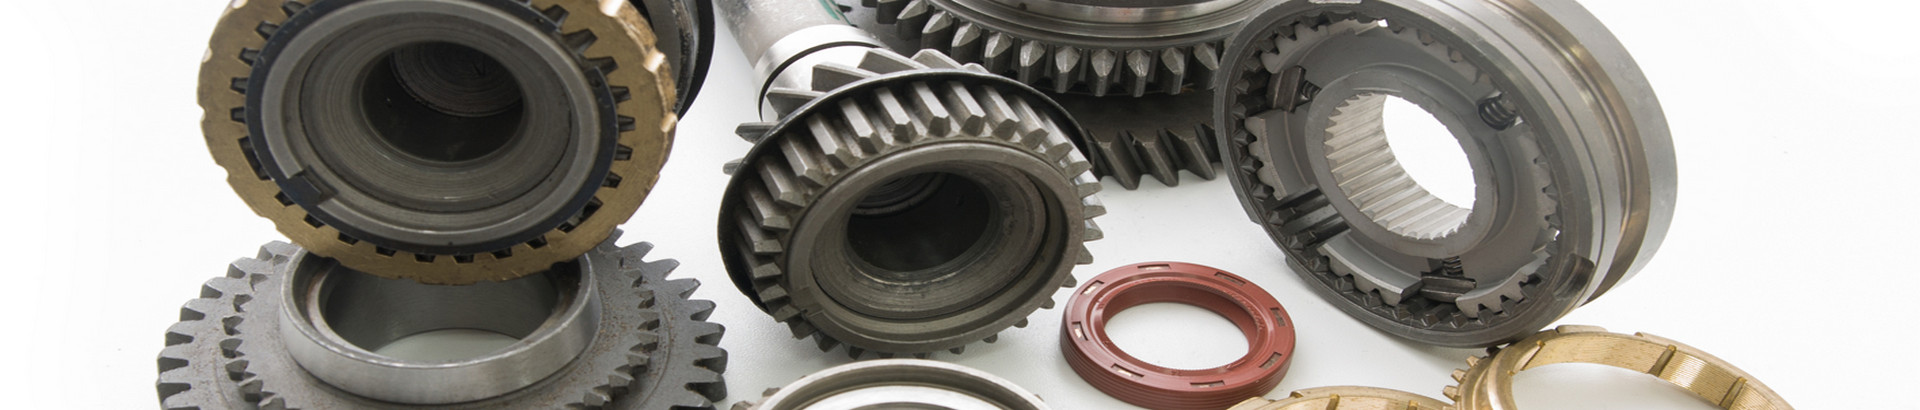 What Are the Types and Uses of Common Bearings?